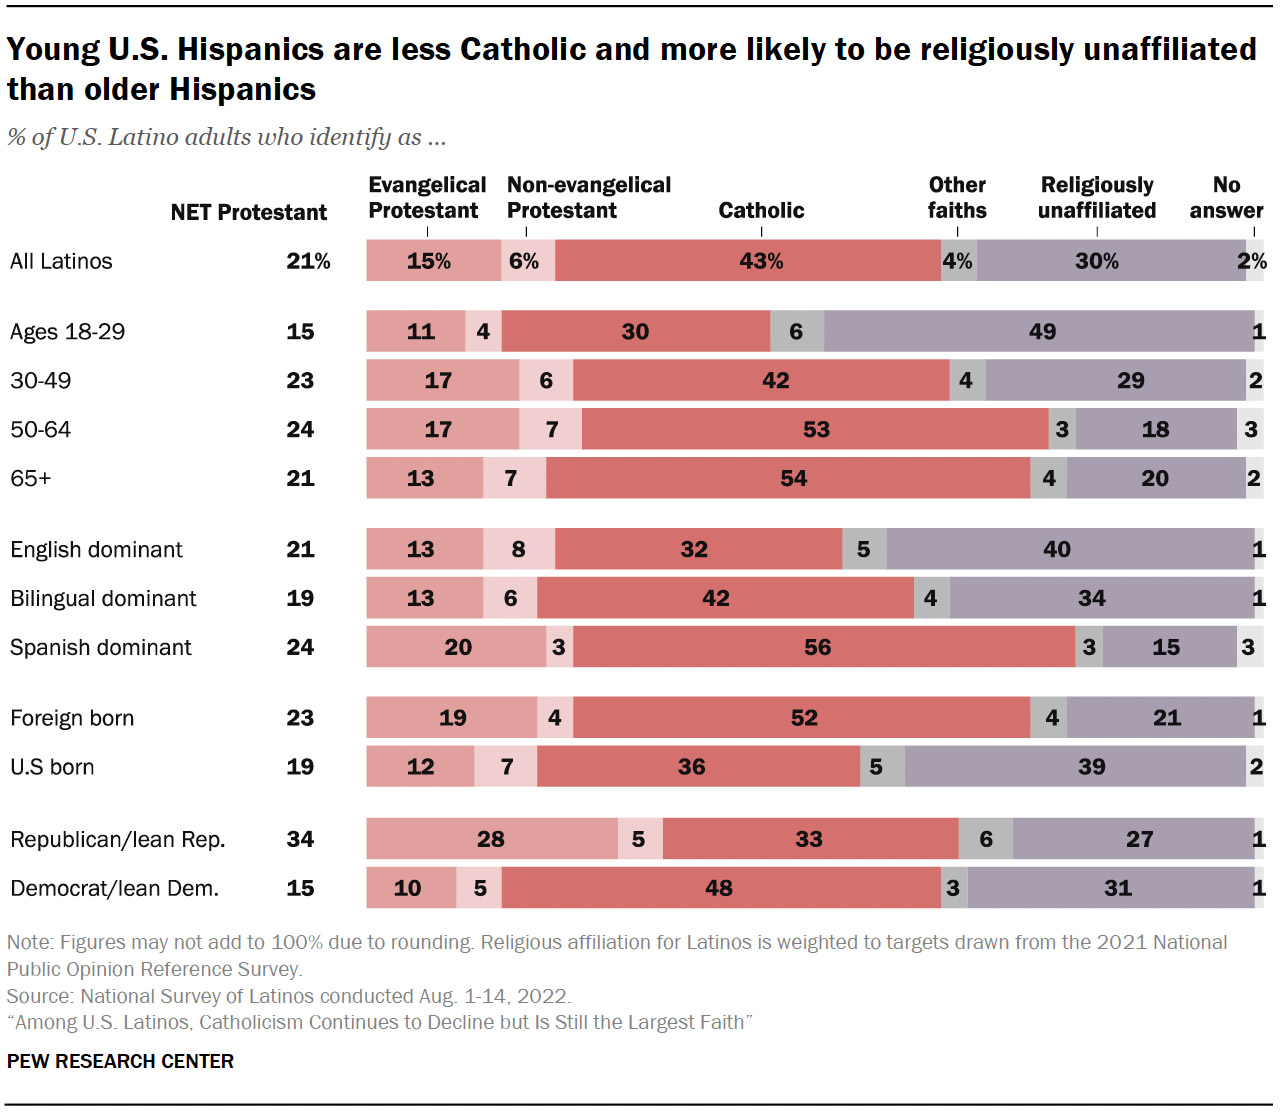 "Young U.S. Hispanics are less Catholic and more likely to be religiously unaffiliated than older Hispanics" Graphic courtesy of Pew Research Center